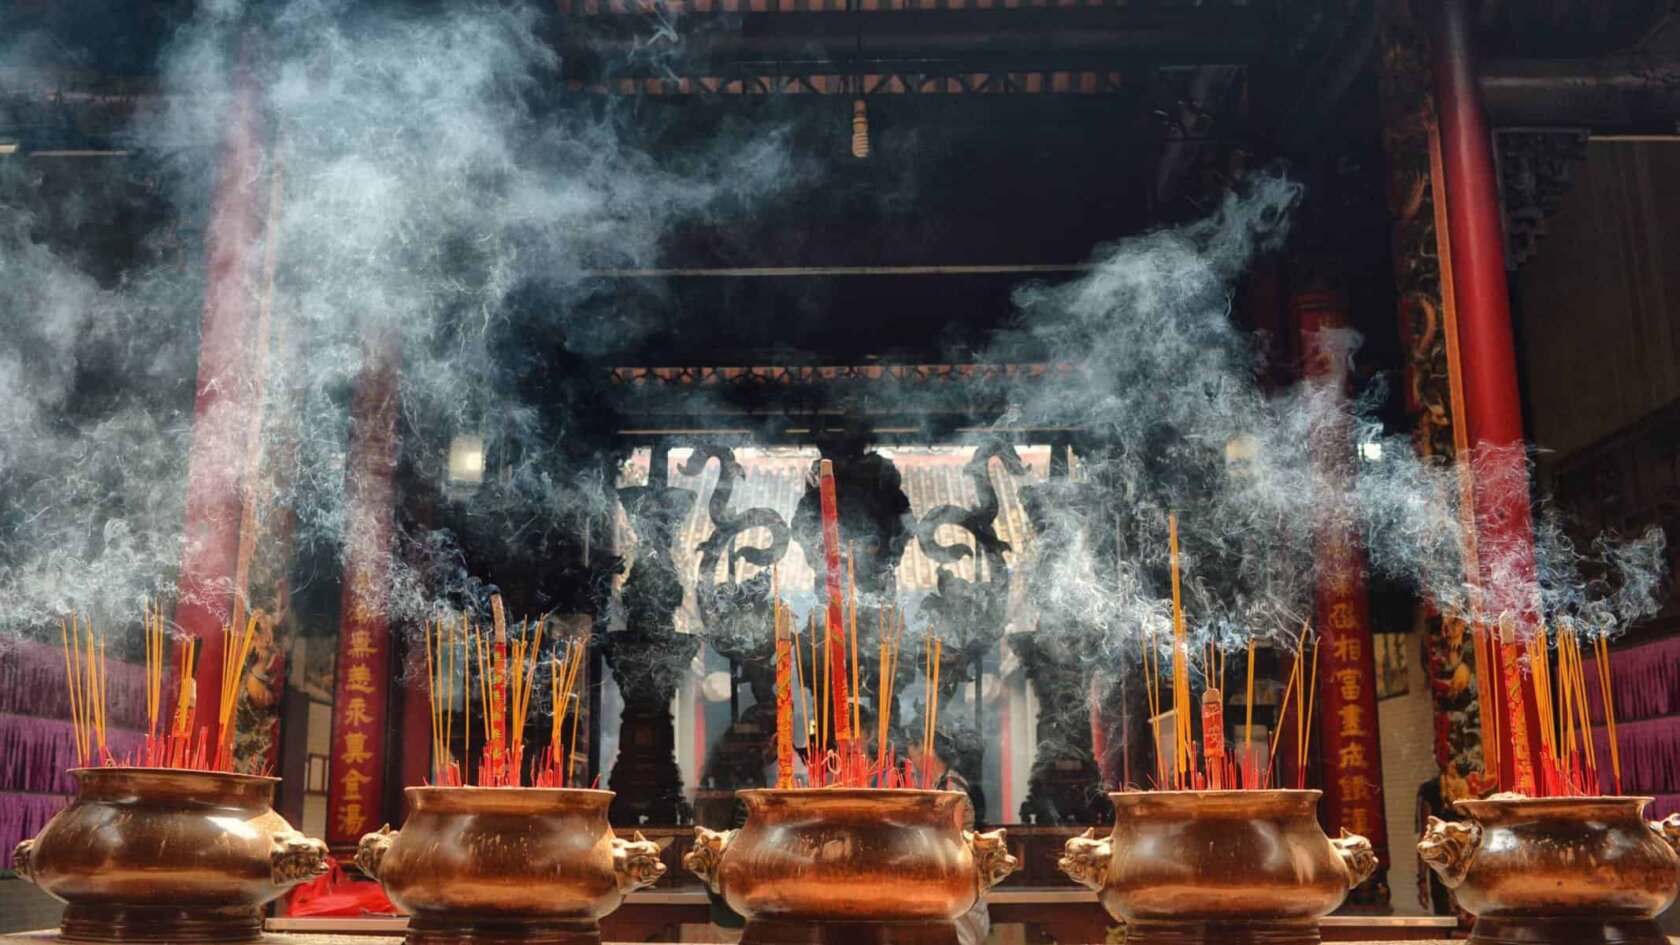 A Vietnamese Temple with Incense